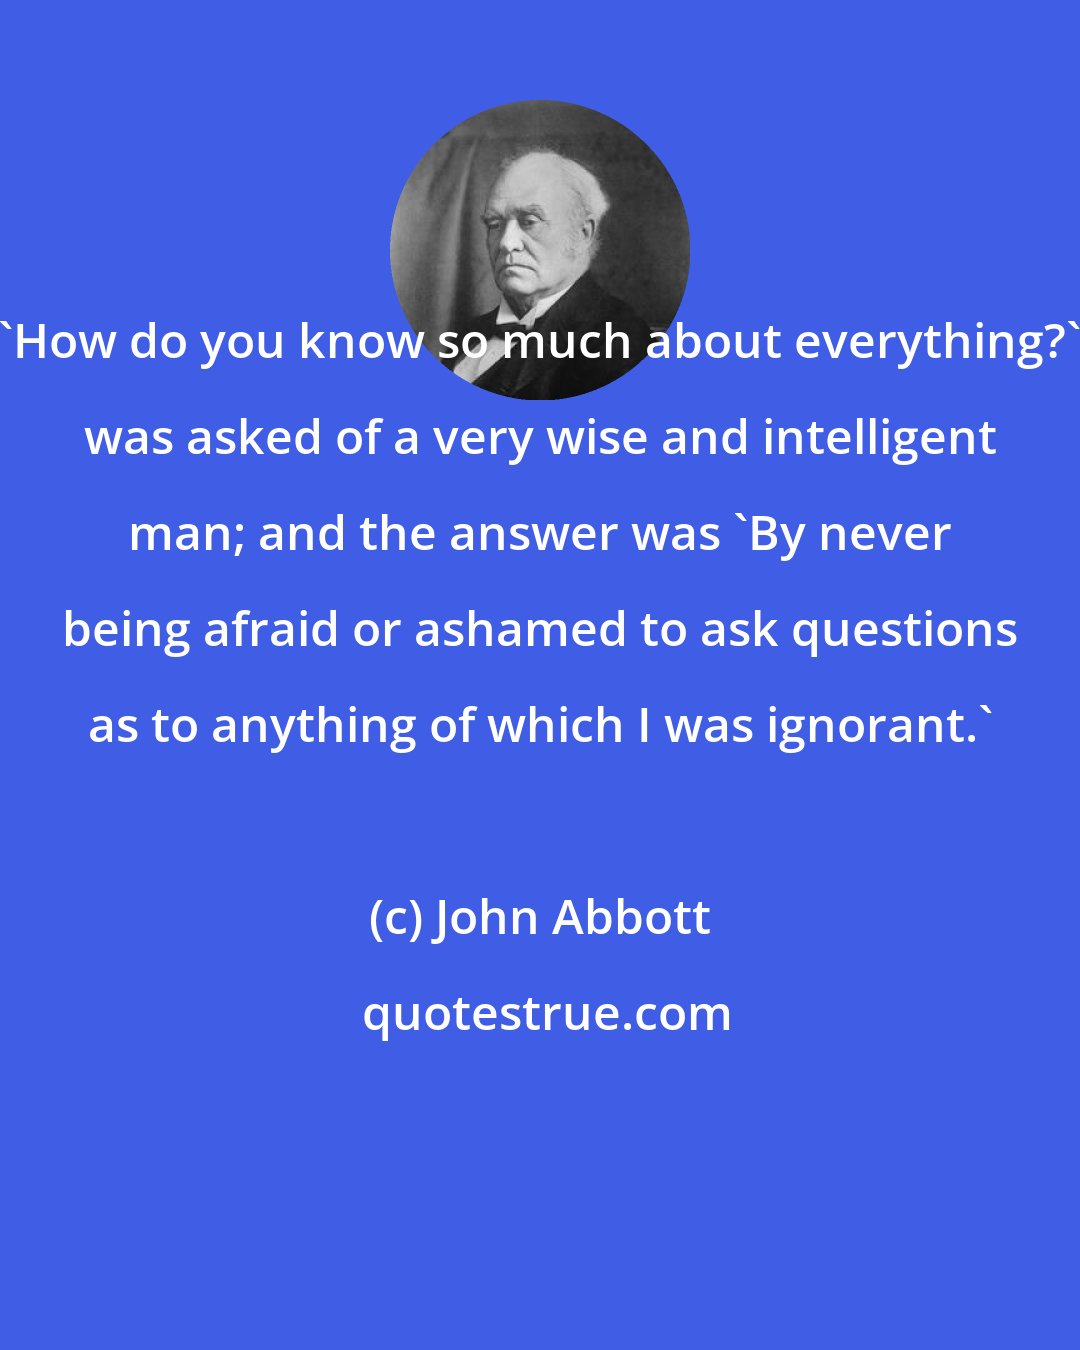 John Abbott: 'How do you know so much about everything?' was asked of a very wise and intelligent man; and the answer was 'By never being afraid or ashamed to ask questions as to anything of which I was ignorant.'